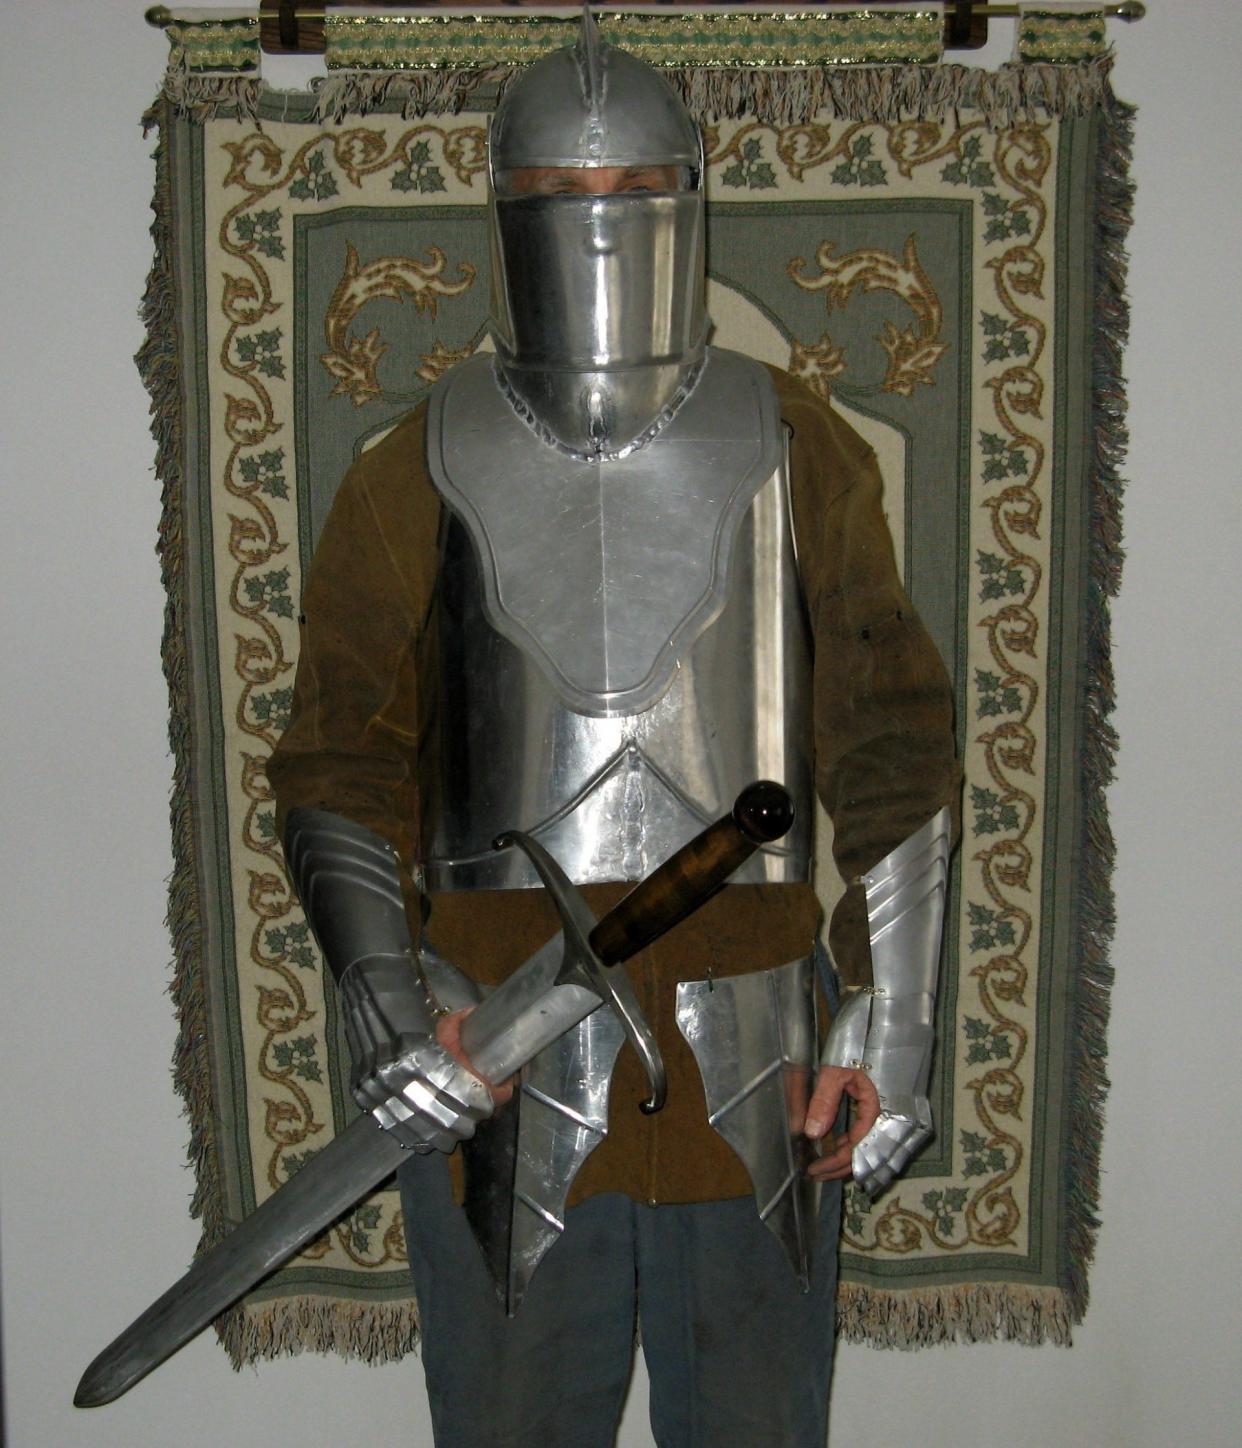 Local metal artist Greg Koesel made this suit of armor several years ago for a Mardi Gras parade. He studied how medieval suits were made by visiting museums. Koesel will show the suit Tuesday at the United Way building.